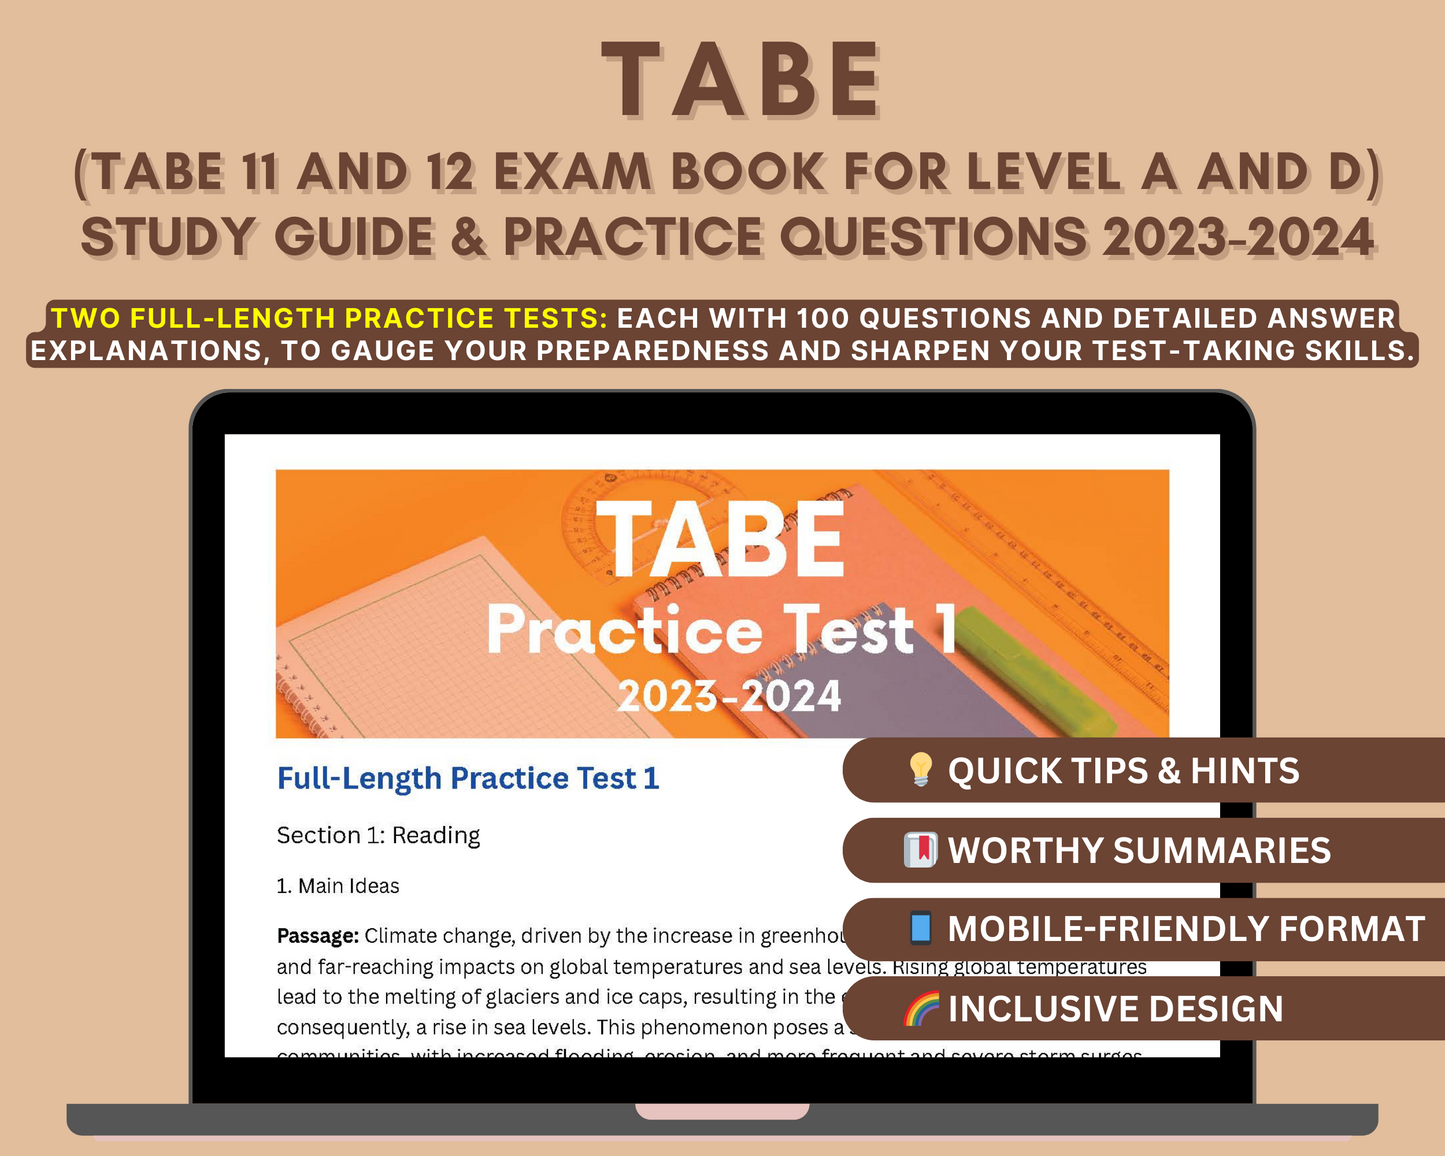 TABE Test Study Guide 2023-2024: Unlock Success with In-Depth Content Review, Practice Tests & Exam Strategies